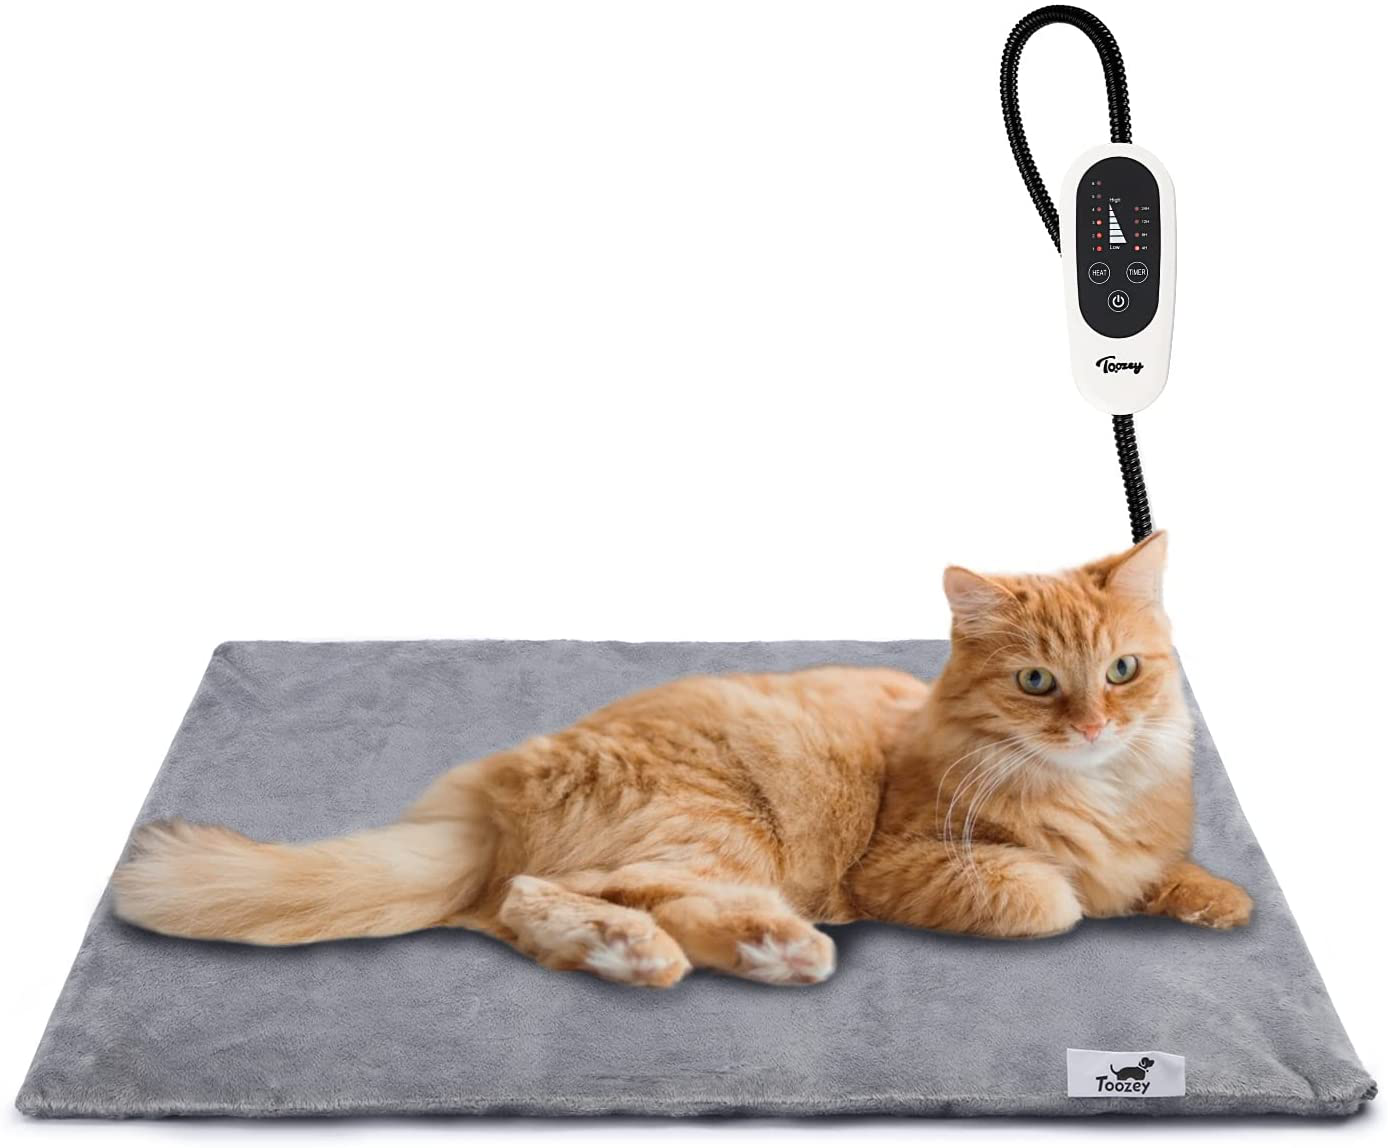 Toozey Pet Heating Pad, Temperature Adjustable Dog Cat Heating Pad with Timer, Waterproof Pet Heating Pads for Cats Dogs with Chew Resistant Cord, Electric Pads for Dogs Cats, Pet Heated Mat Animals & Pet Supplies > Pet Supplies > Cat Supplies > Cat Beds Toozey Grey S: 18" x 16" 